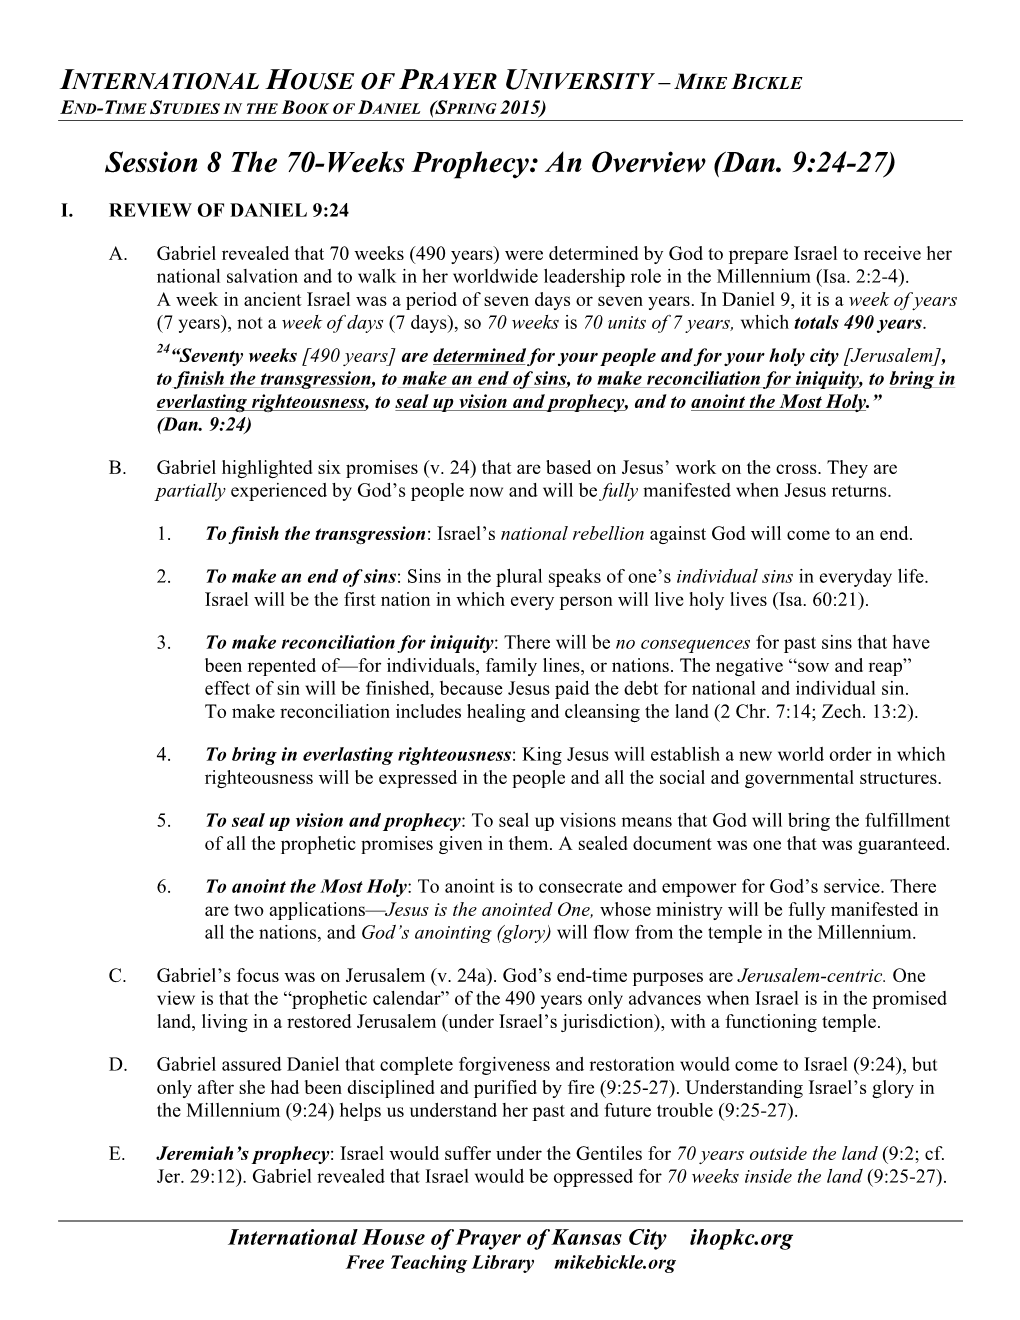 Session 8 the 70-Weeks Prophecy: an Overview (Dan